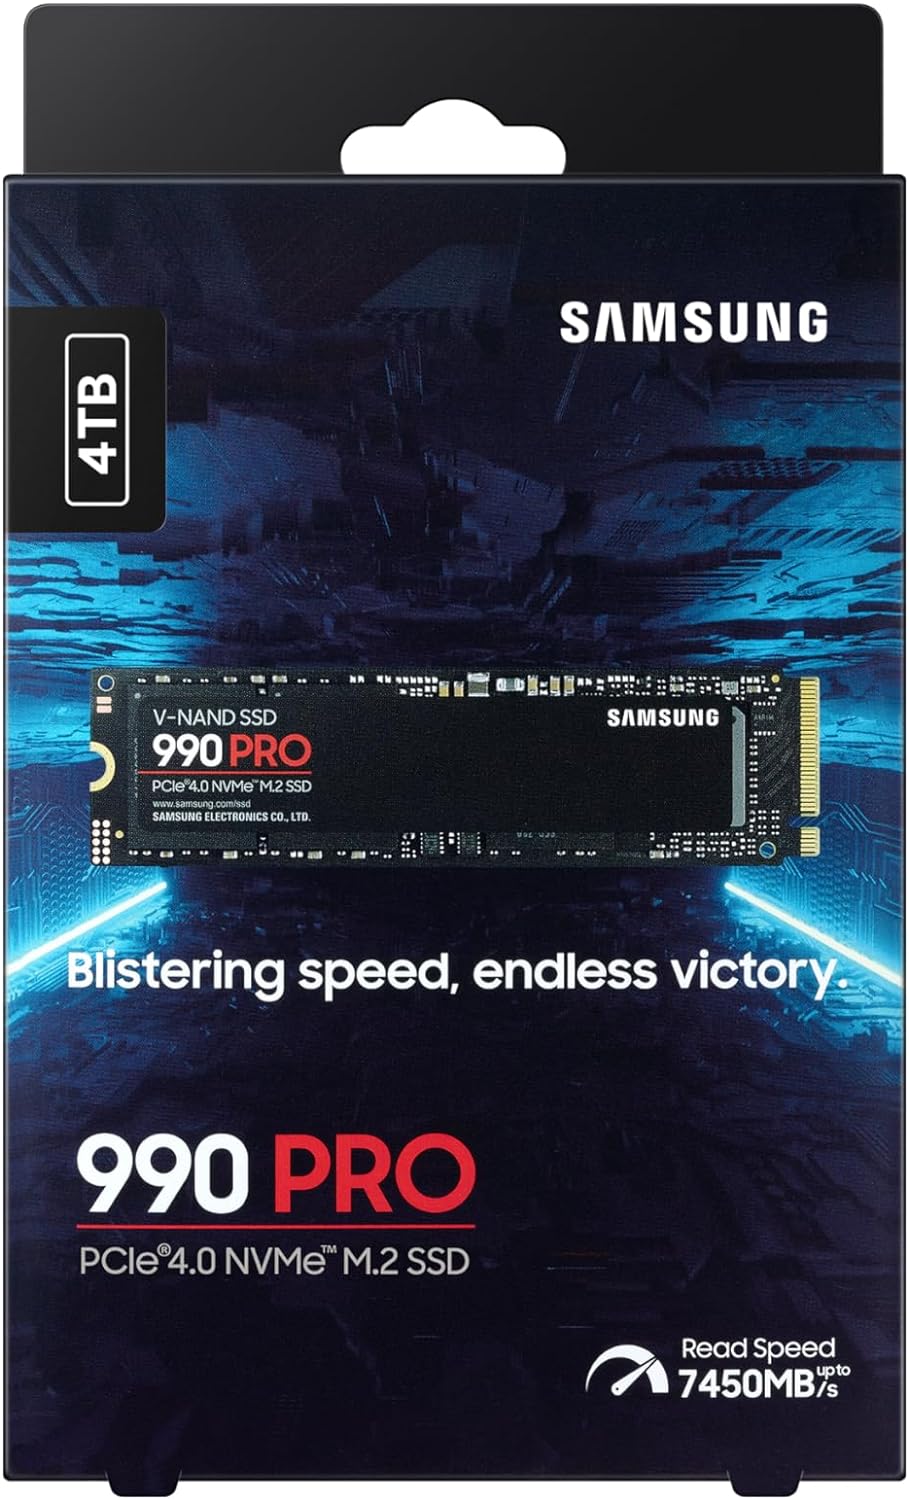 Samsung 990 Pro 4TB NVMe M.2 SSD, PCIe Gen 4.0, 7450 MB/s Sequential Read Speed, 6900 MB/s Sequential Write Speed, 3.3 Voltage, V-NAND 3-bit MLC MZ-V9P4T0BW